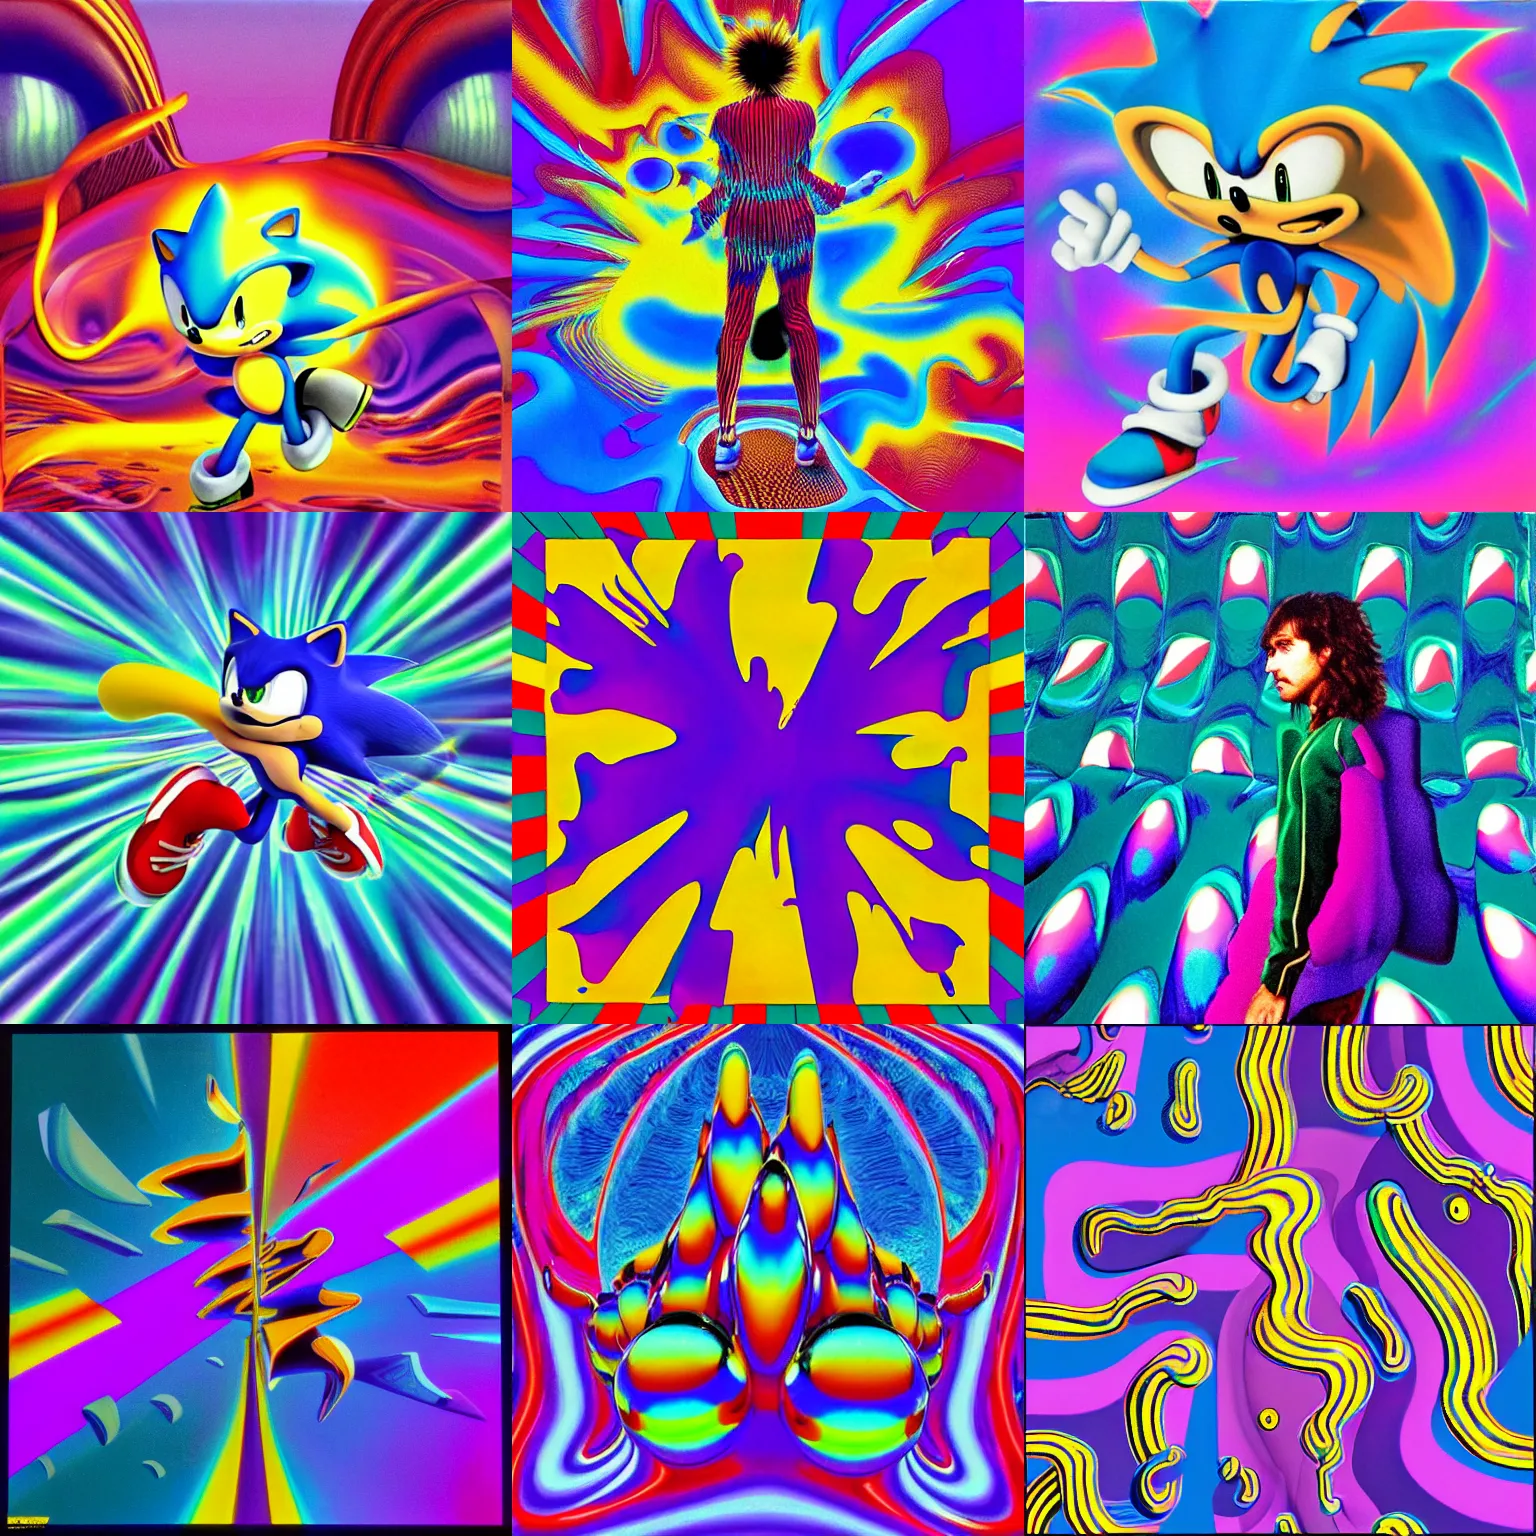 Prompt: surreal, soft, hyperrealistic sonic portrait professional, high quality airbrush art tame impala album cover of a liquid dissolving airbrush art lsd dmt sonic the hedgehog dashing through cyberspace, purple checkerboard background, 1 9 8 0 s 1 9 8 2 sega genesis video game album cover